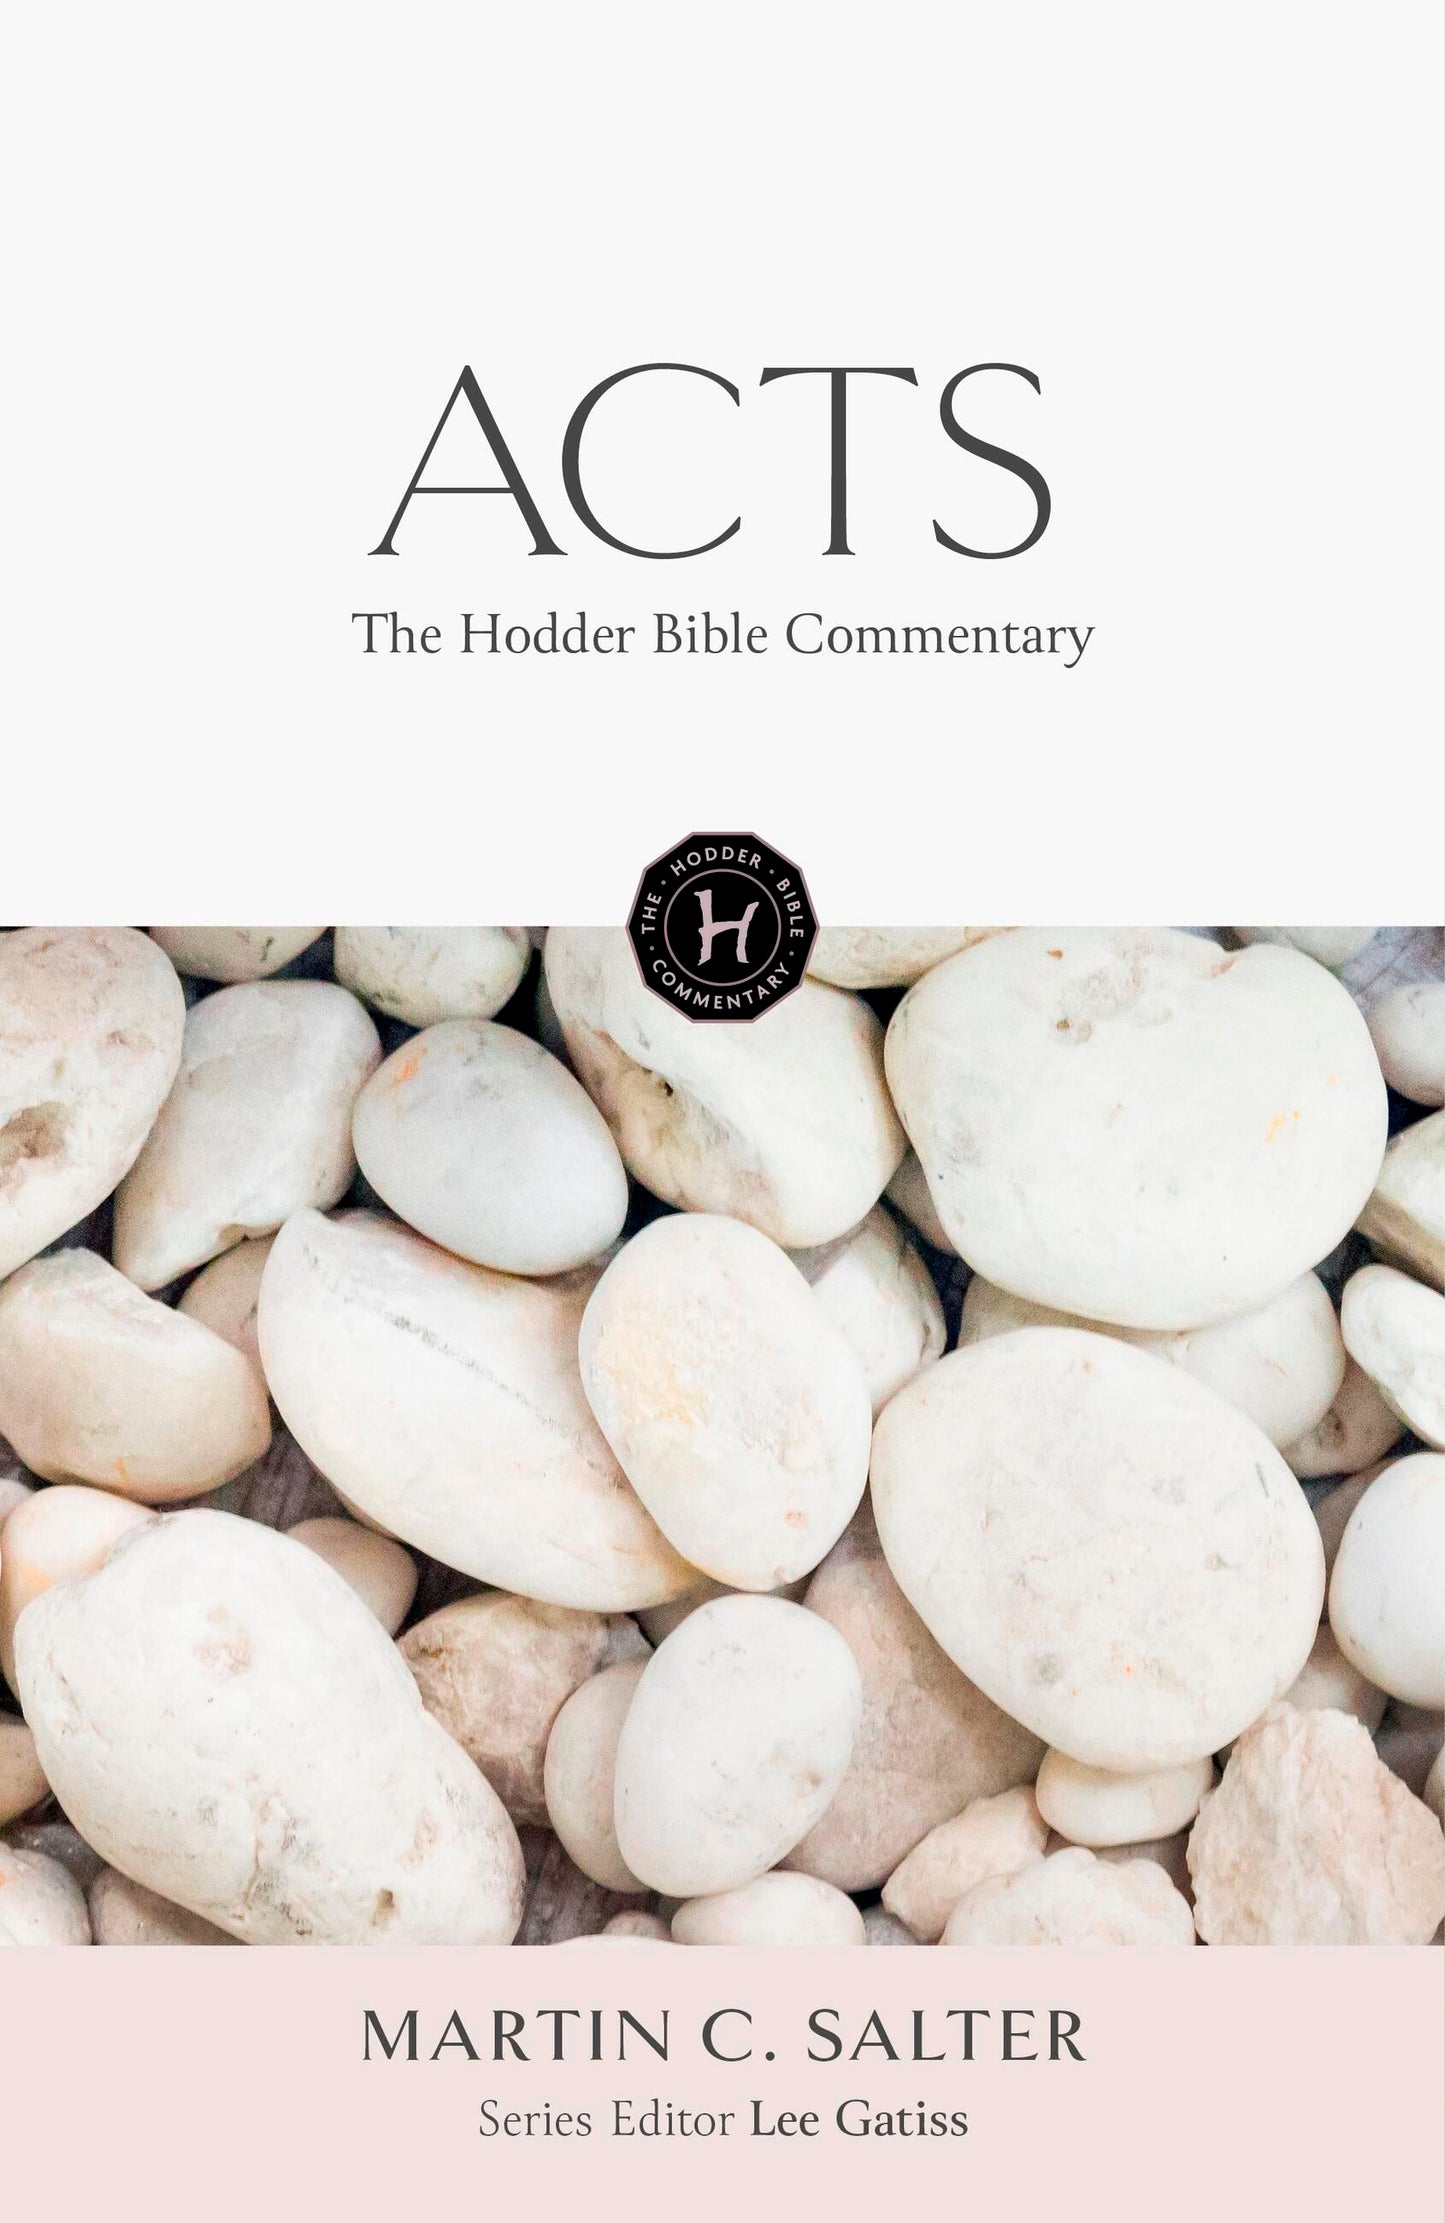 The Hodder Bible Commentary: Acts